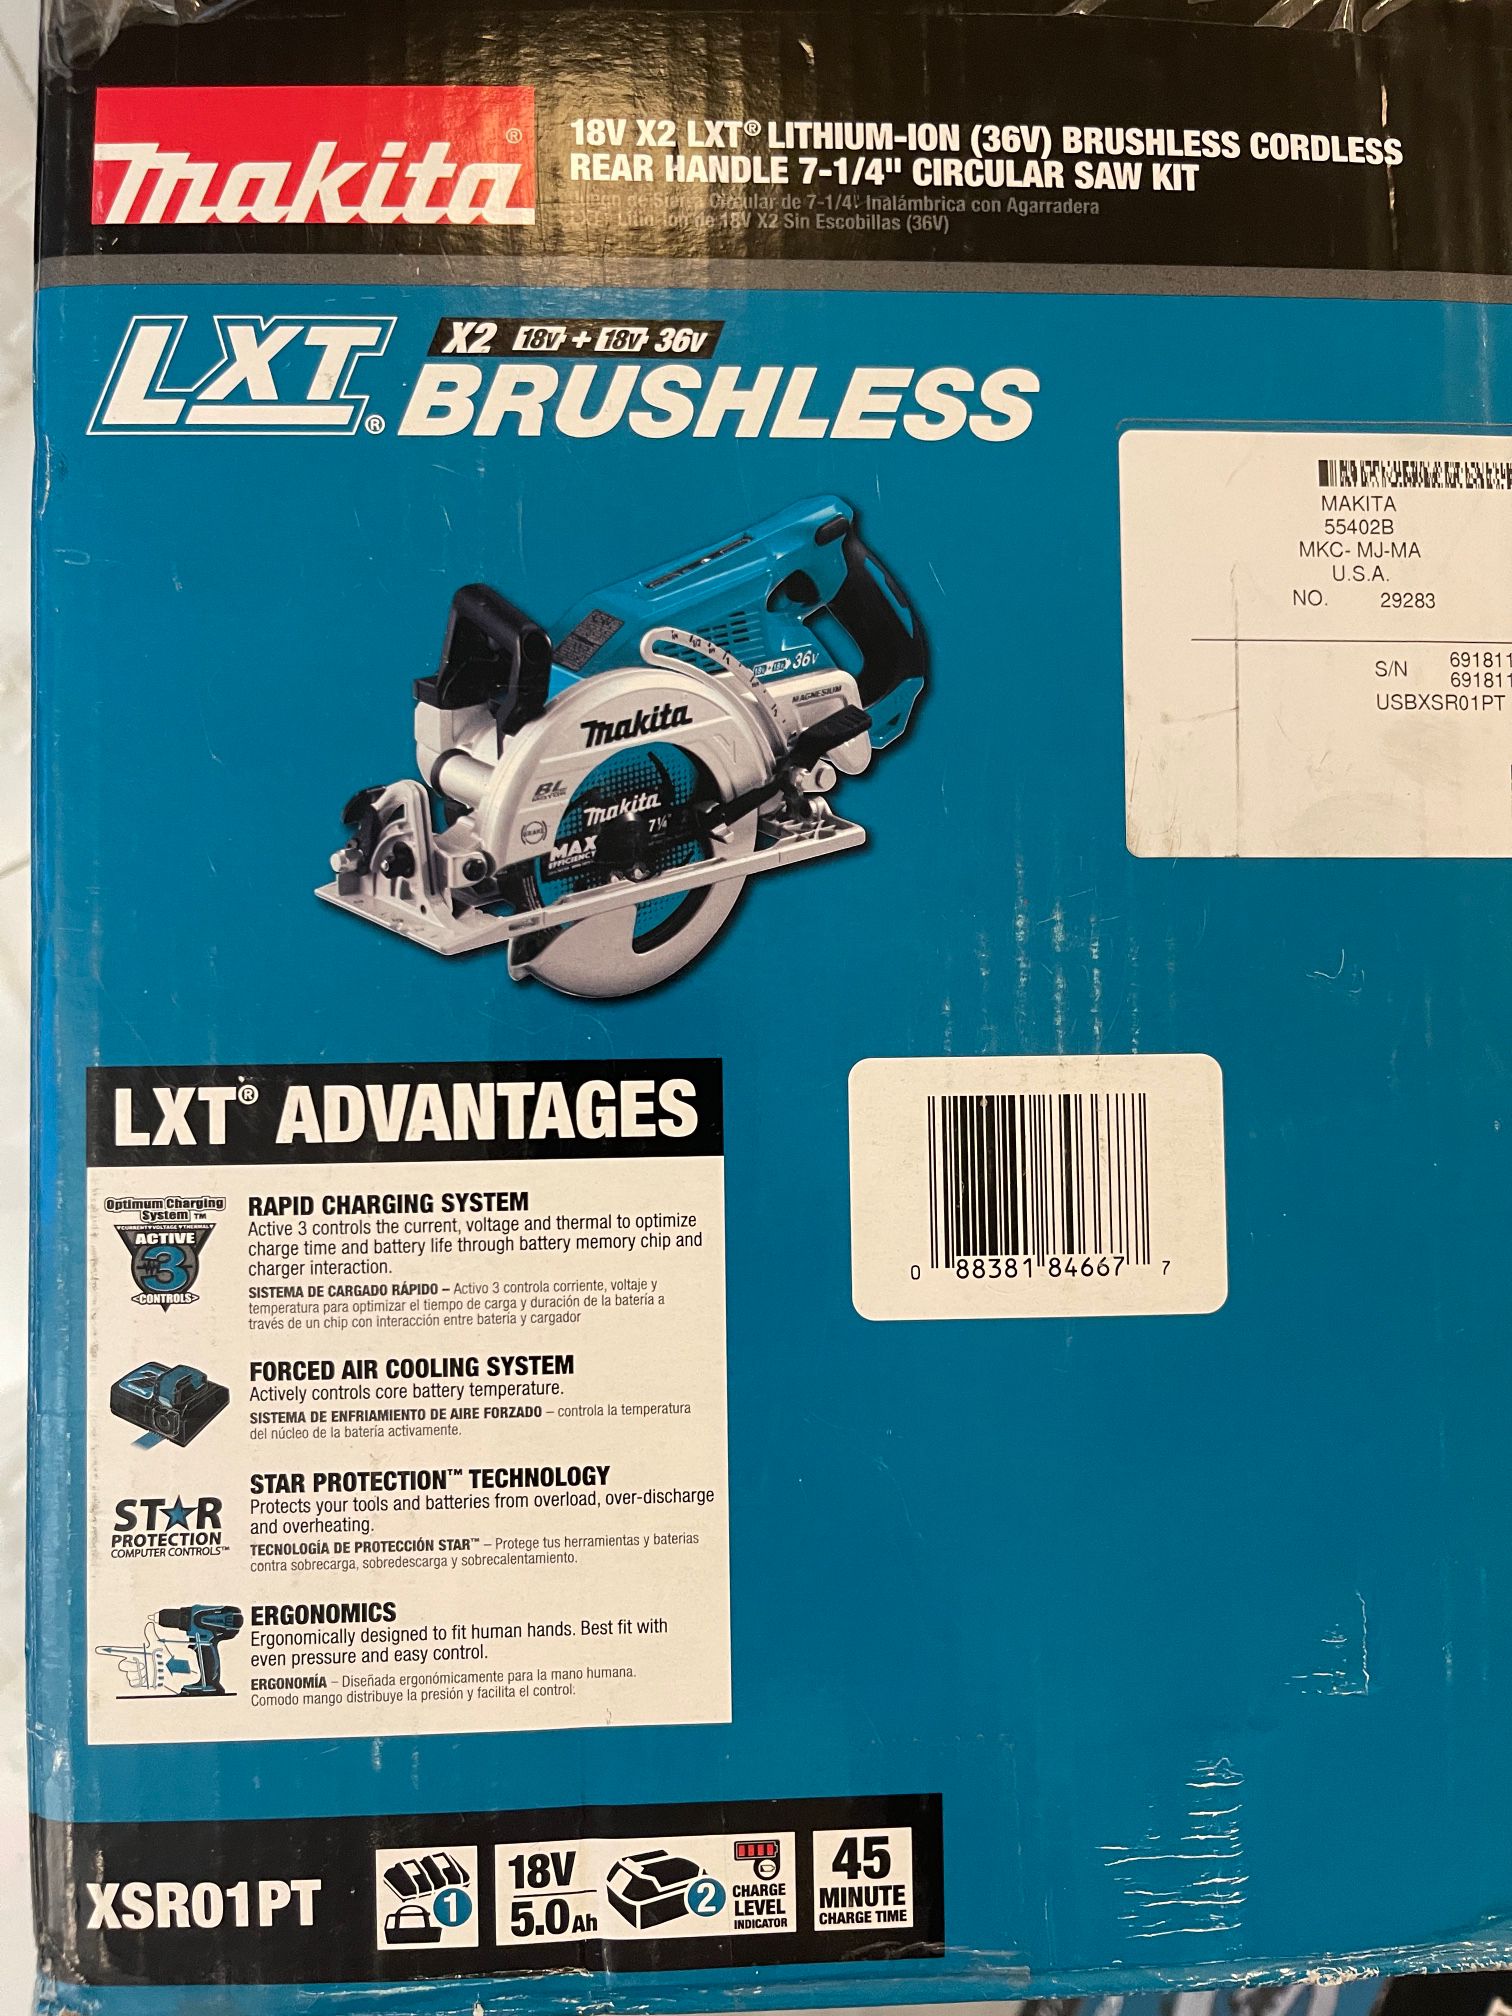 Makita 18V X2 LXT 5.0Ah Lithium-Ion (36V) Brushless Cordless Rear Handle 7-1 /4 in. Circular Saw Kit for Sale in Queens, NY OfferUp